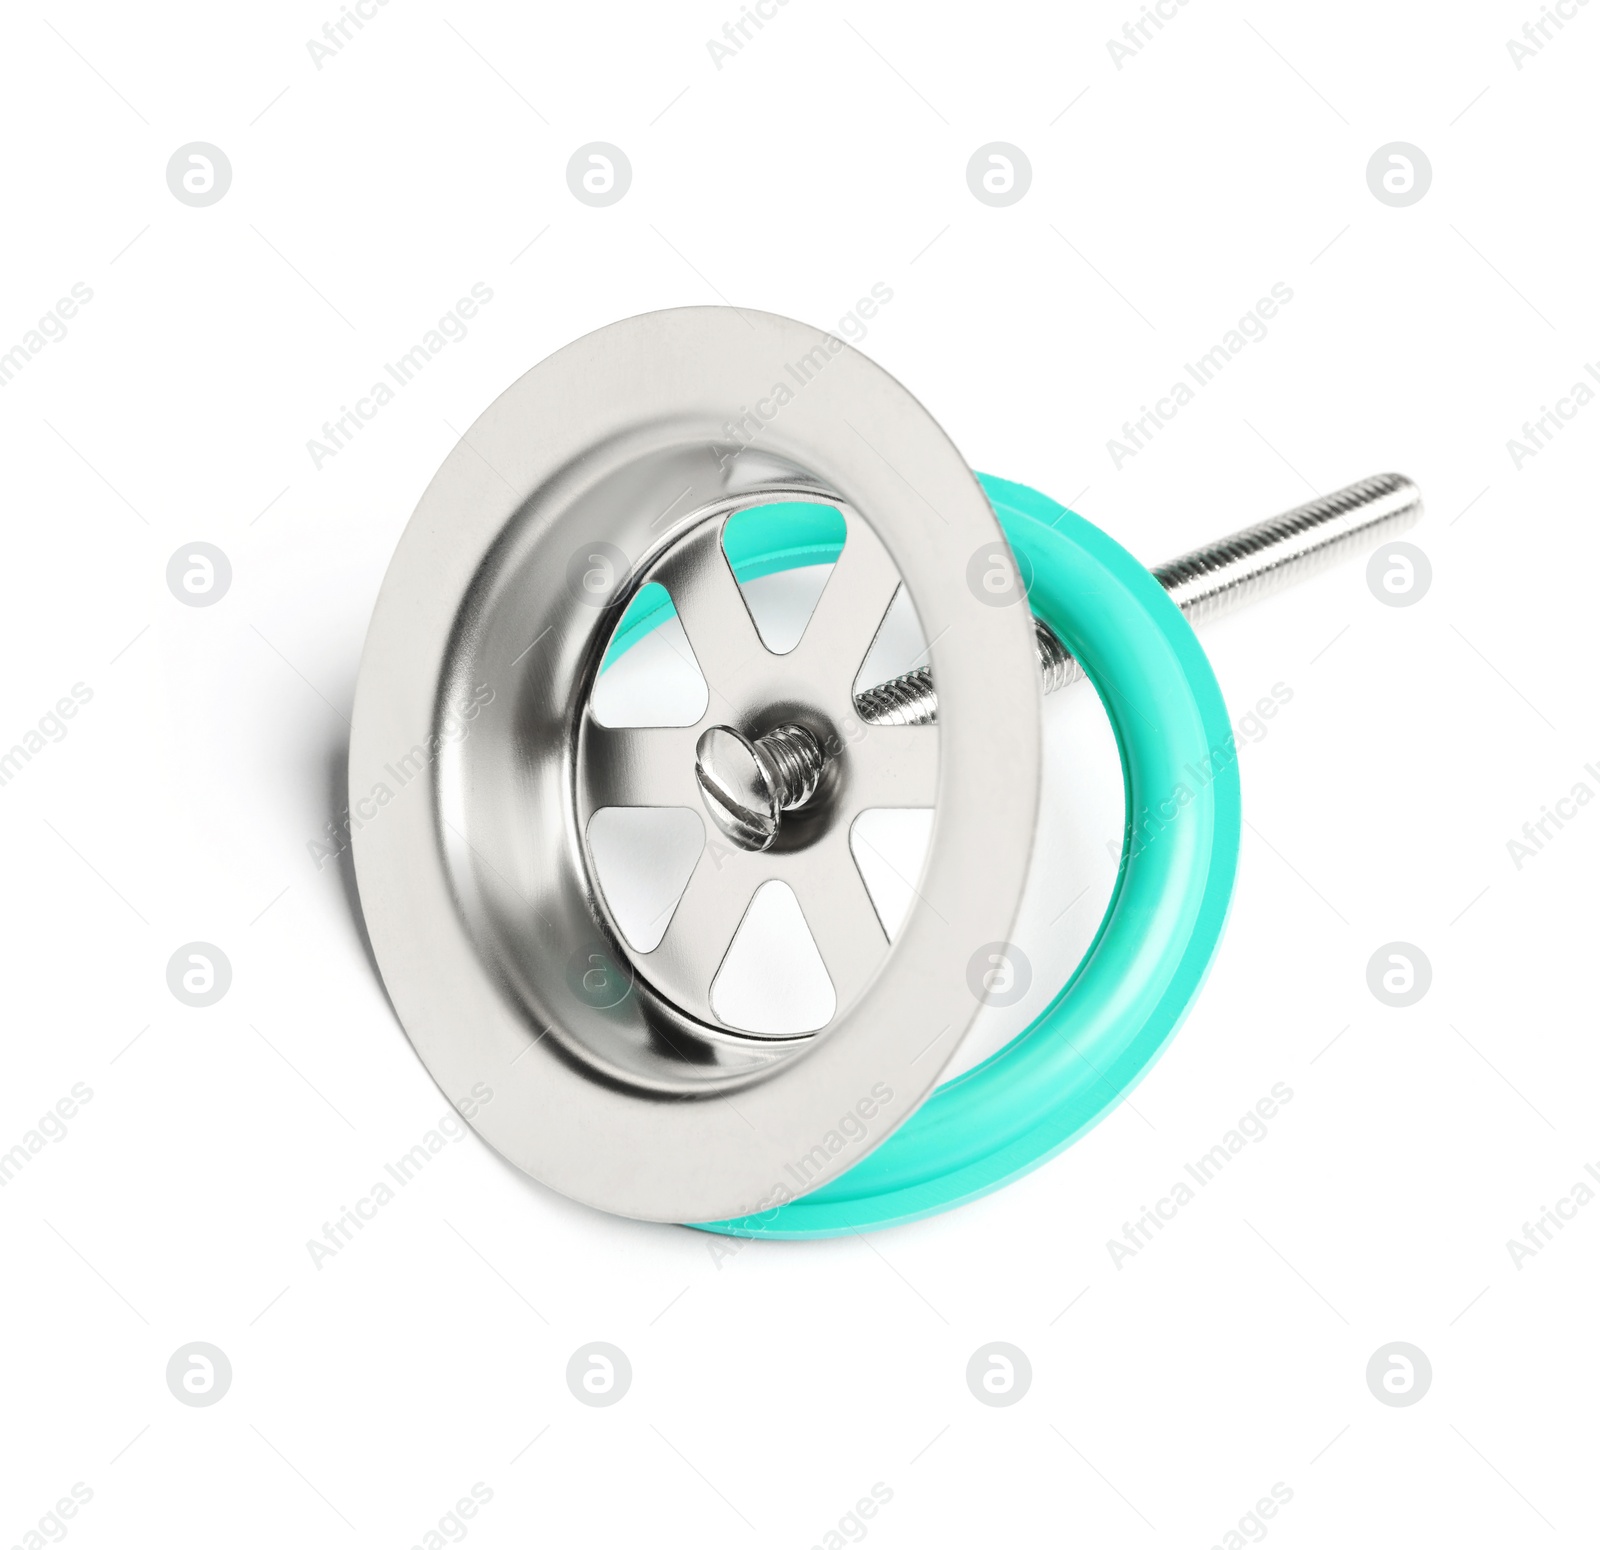 Photo of Sink strainer with rubber seal isolated on white. Plumbing supply